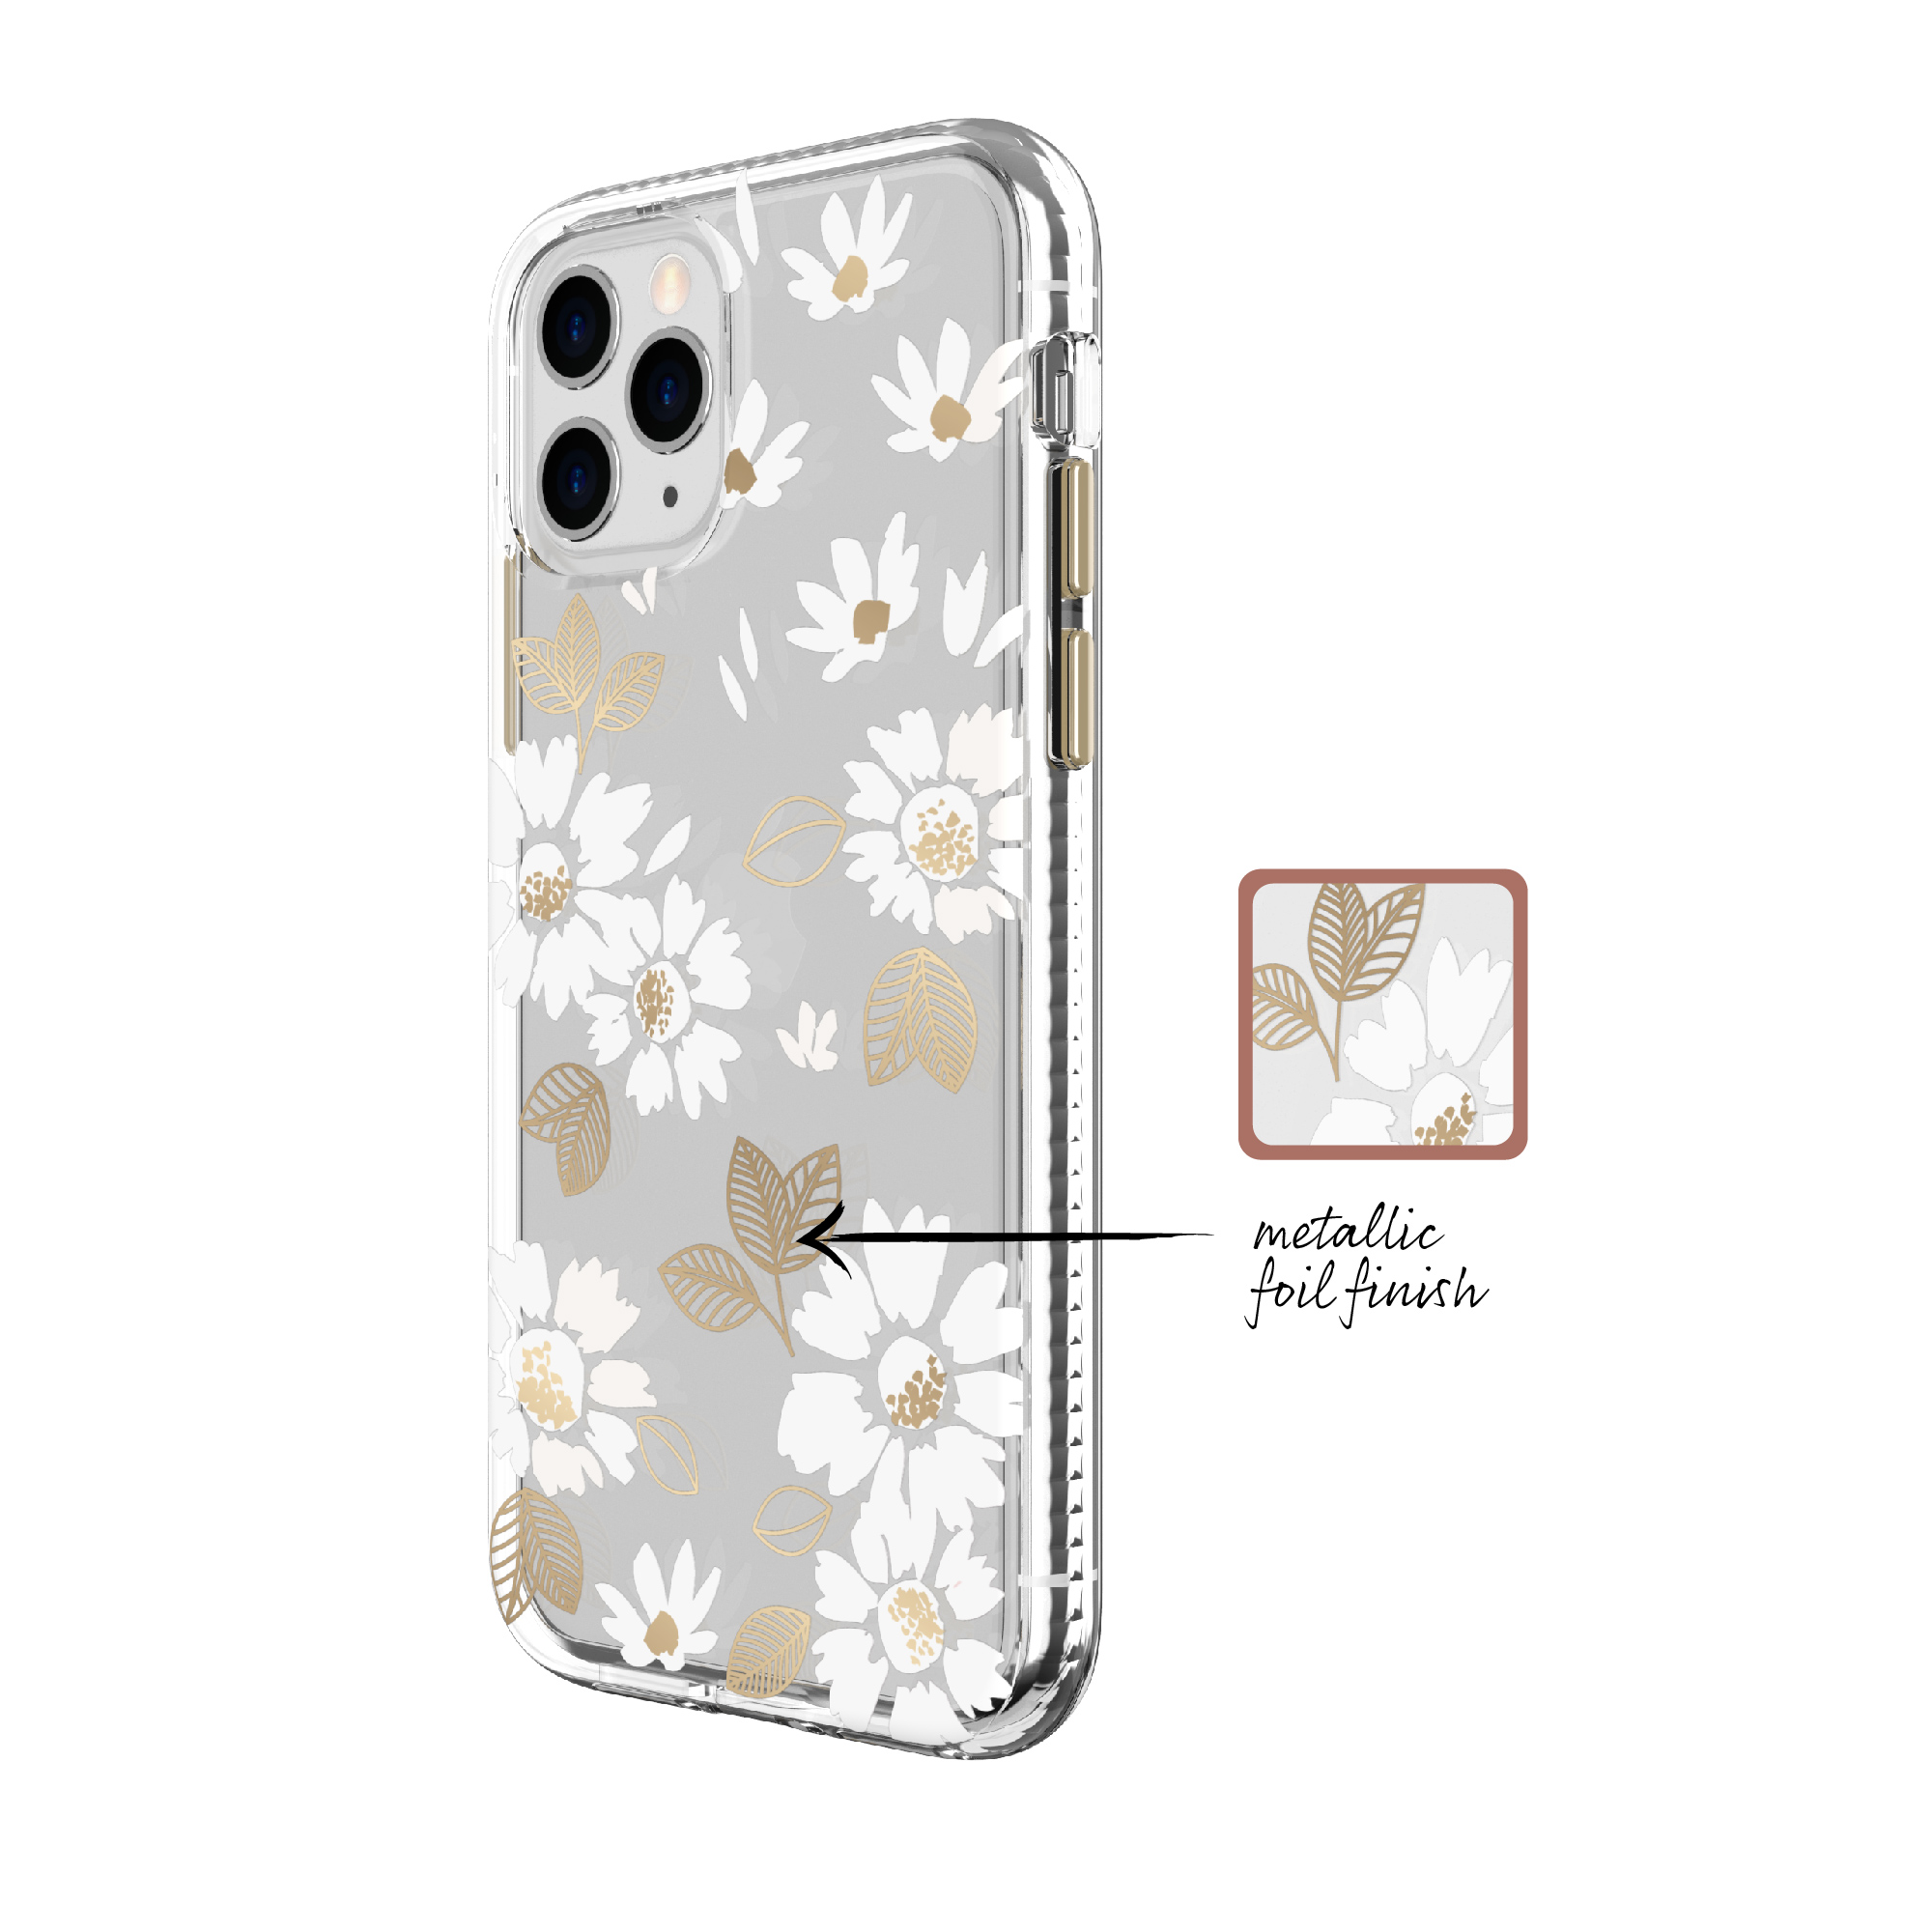 Clear White Floral Phone Case for iPhone 11 Pro - image 4 of 5